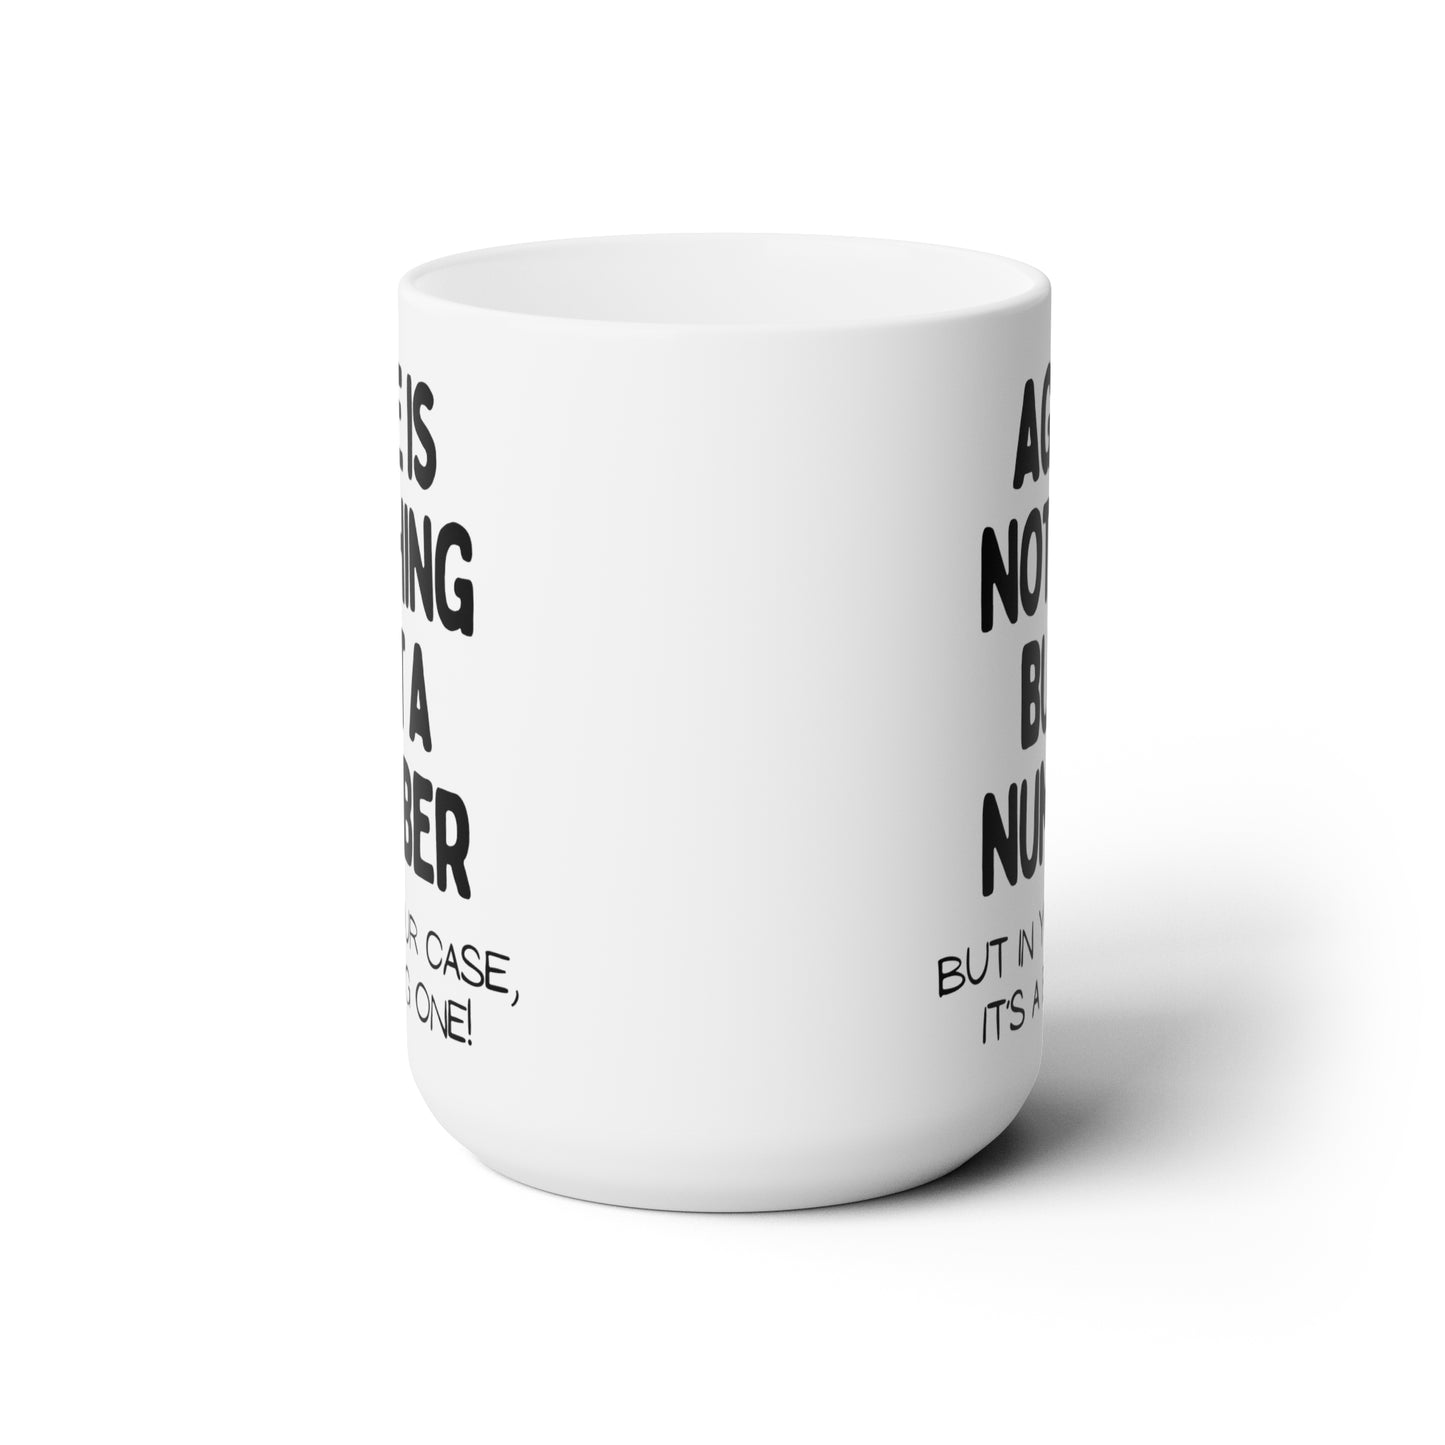 Age is Nothing But a Number Mug 15oz